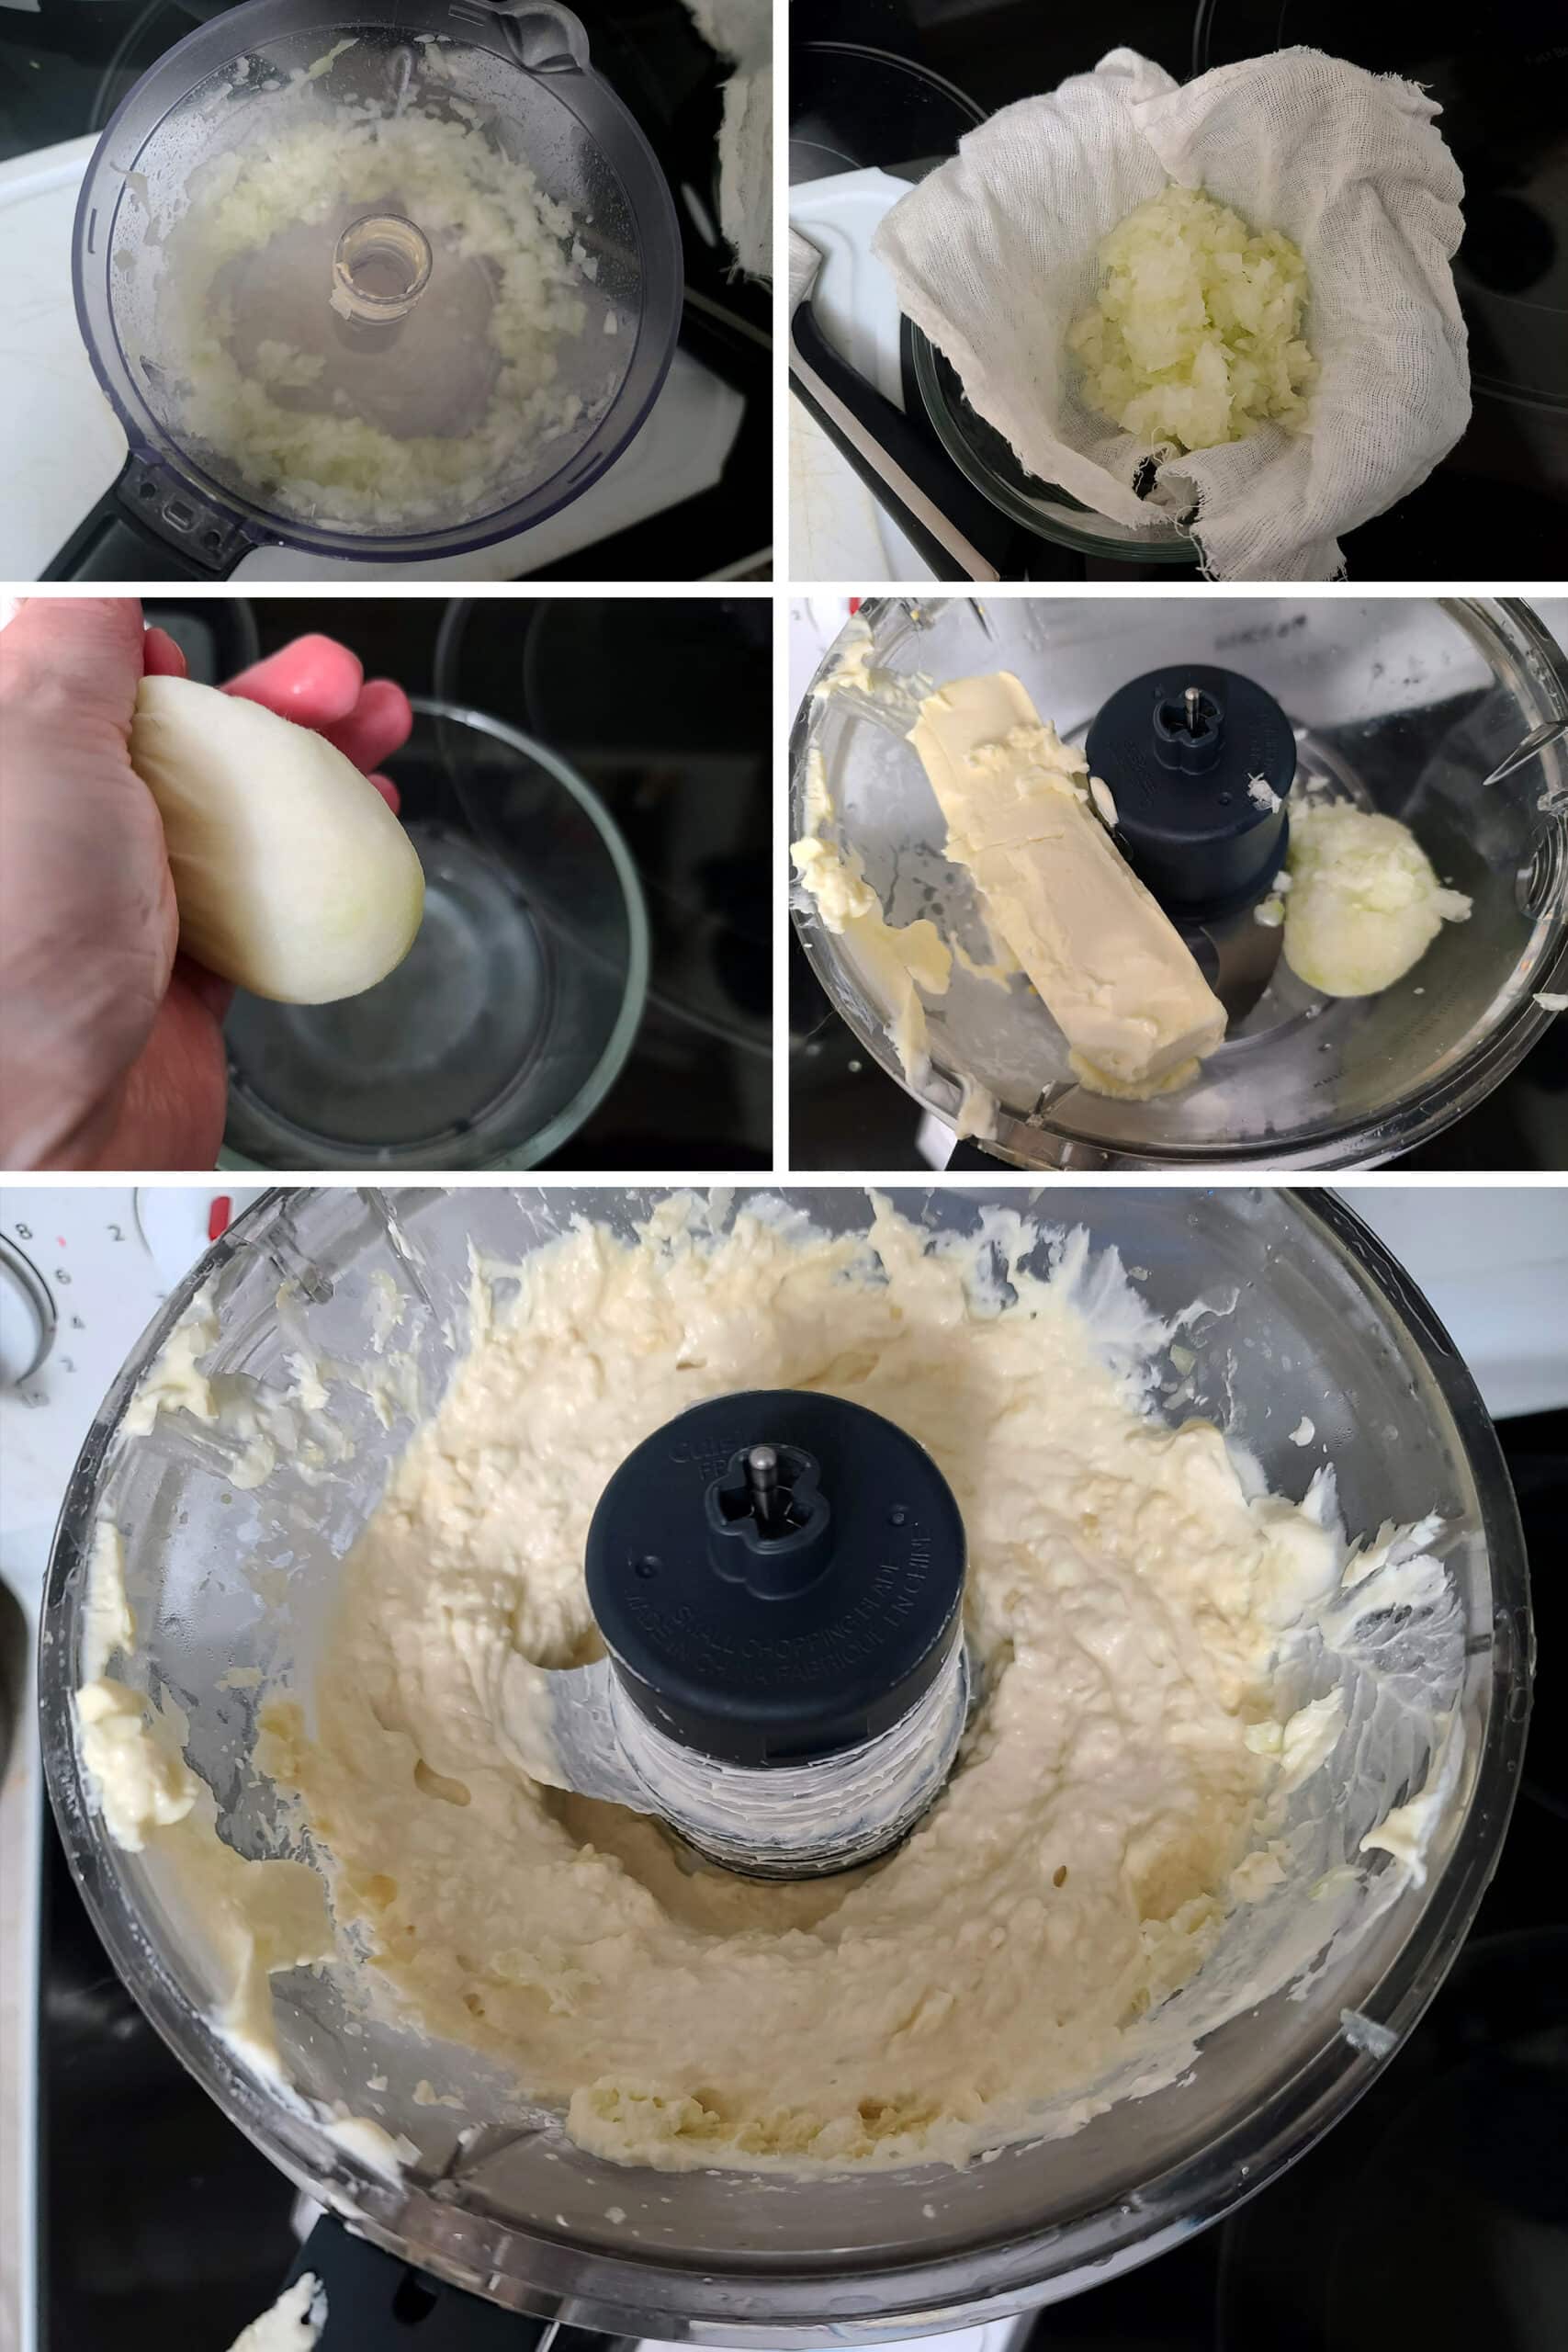 4 part image showing onion being chopped, pureed, squeezed in cheesecloth, and blitzed with cream cheese in a food processor.